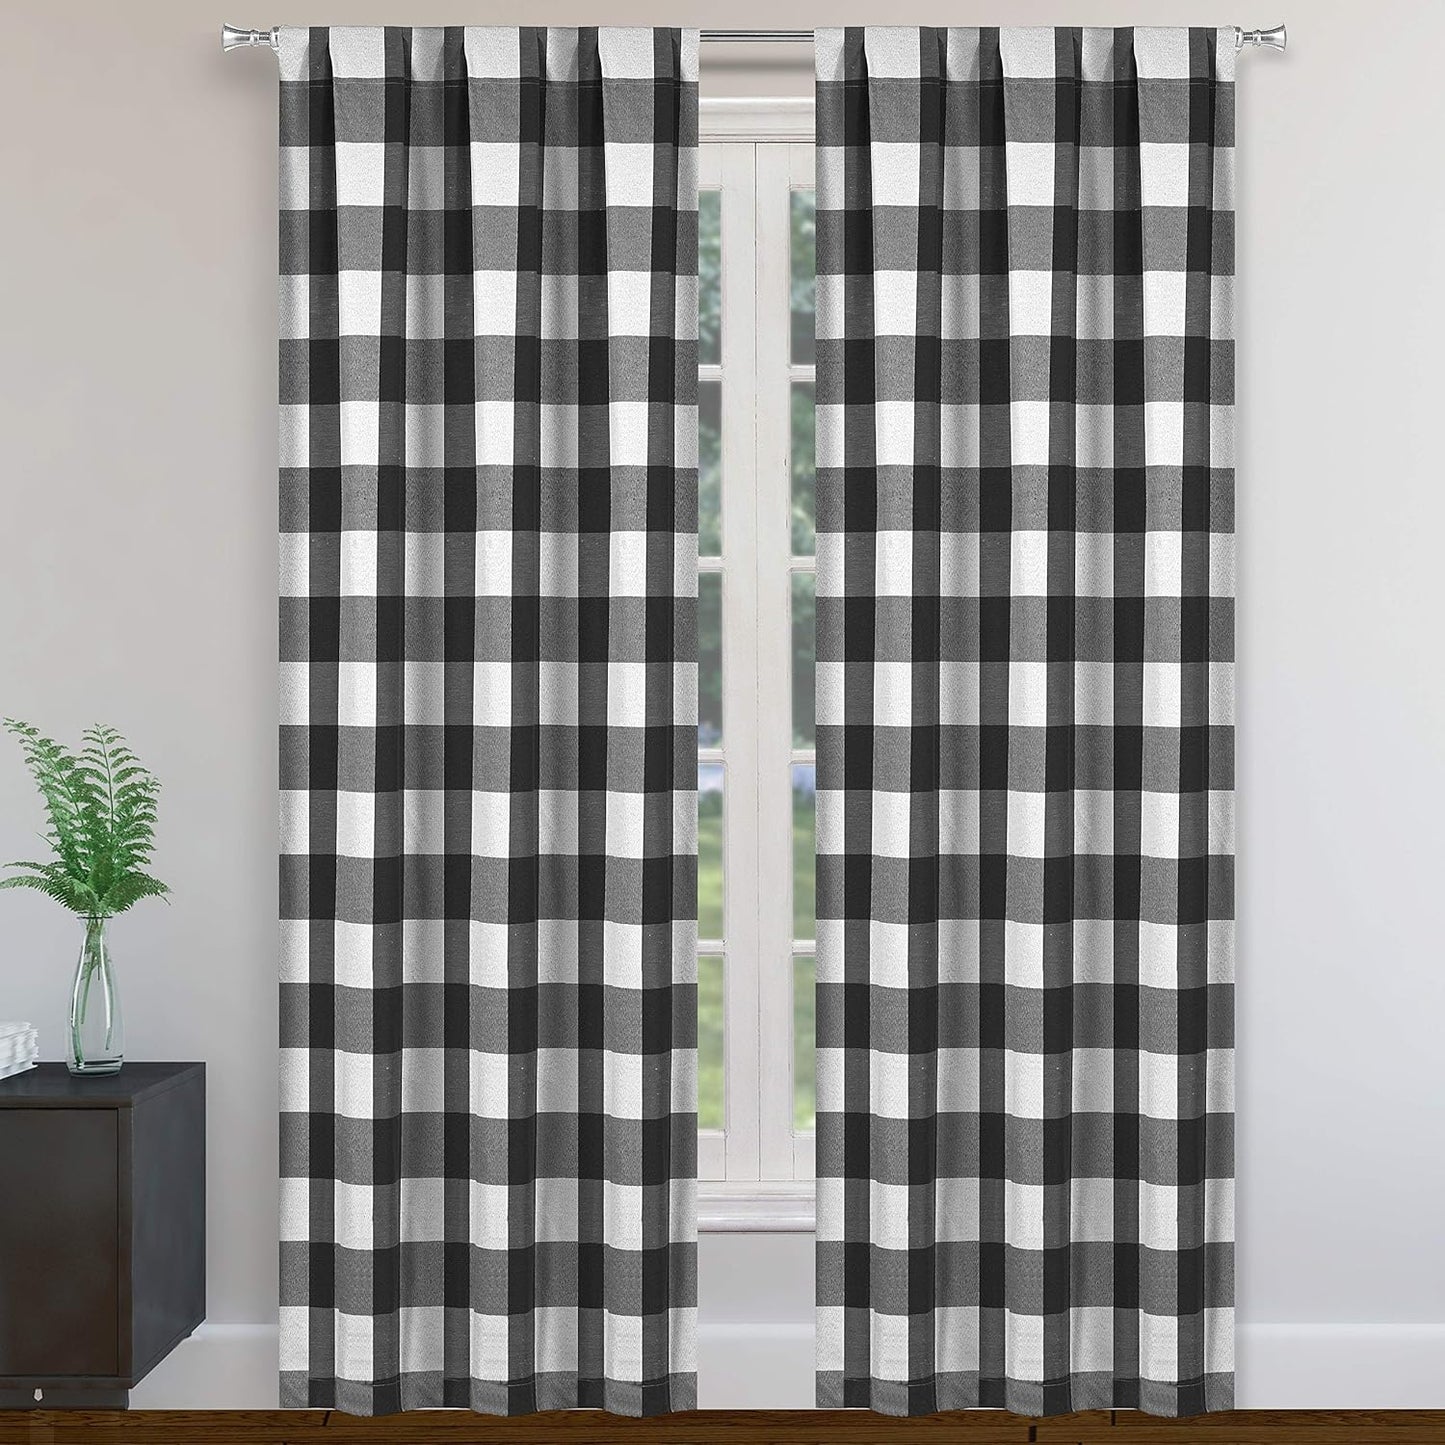 Blackout 365 Aaron Checkered Set Buffalo Plaid Blackout Bedroom-Insulated and Energy Efficient Rod Pocket Window Curtains for Living Room, 37 in X 84 in (W X L), Grey  Blackout 365 Black (Rod Pocket) 37 In X 84 In (W X L) 